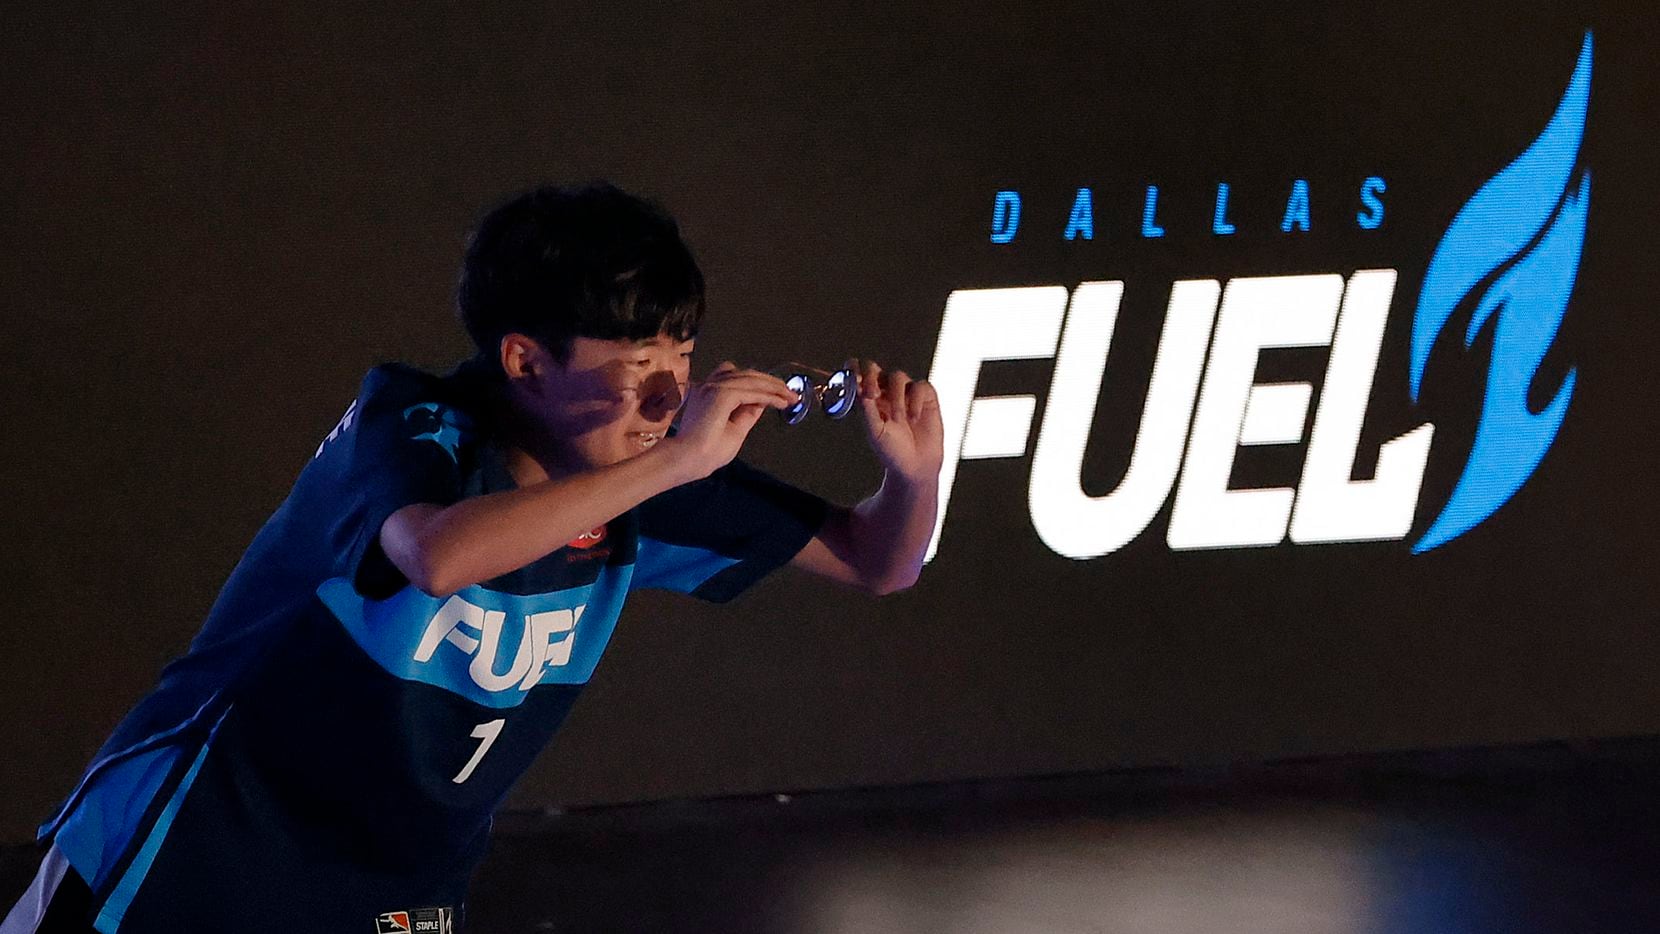 Here are three storylines to watch as Dallas Fuel take on the Boston Uprising Sunday.